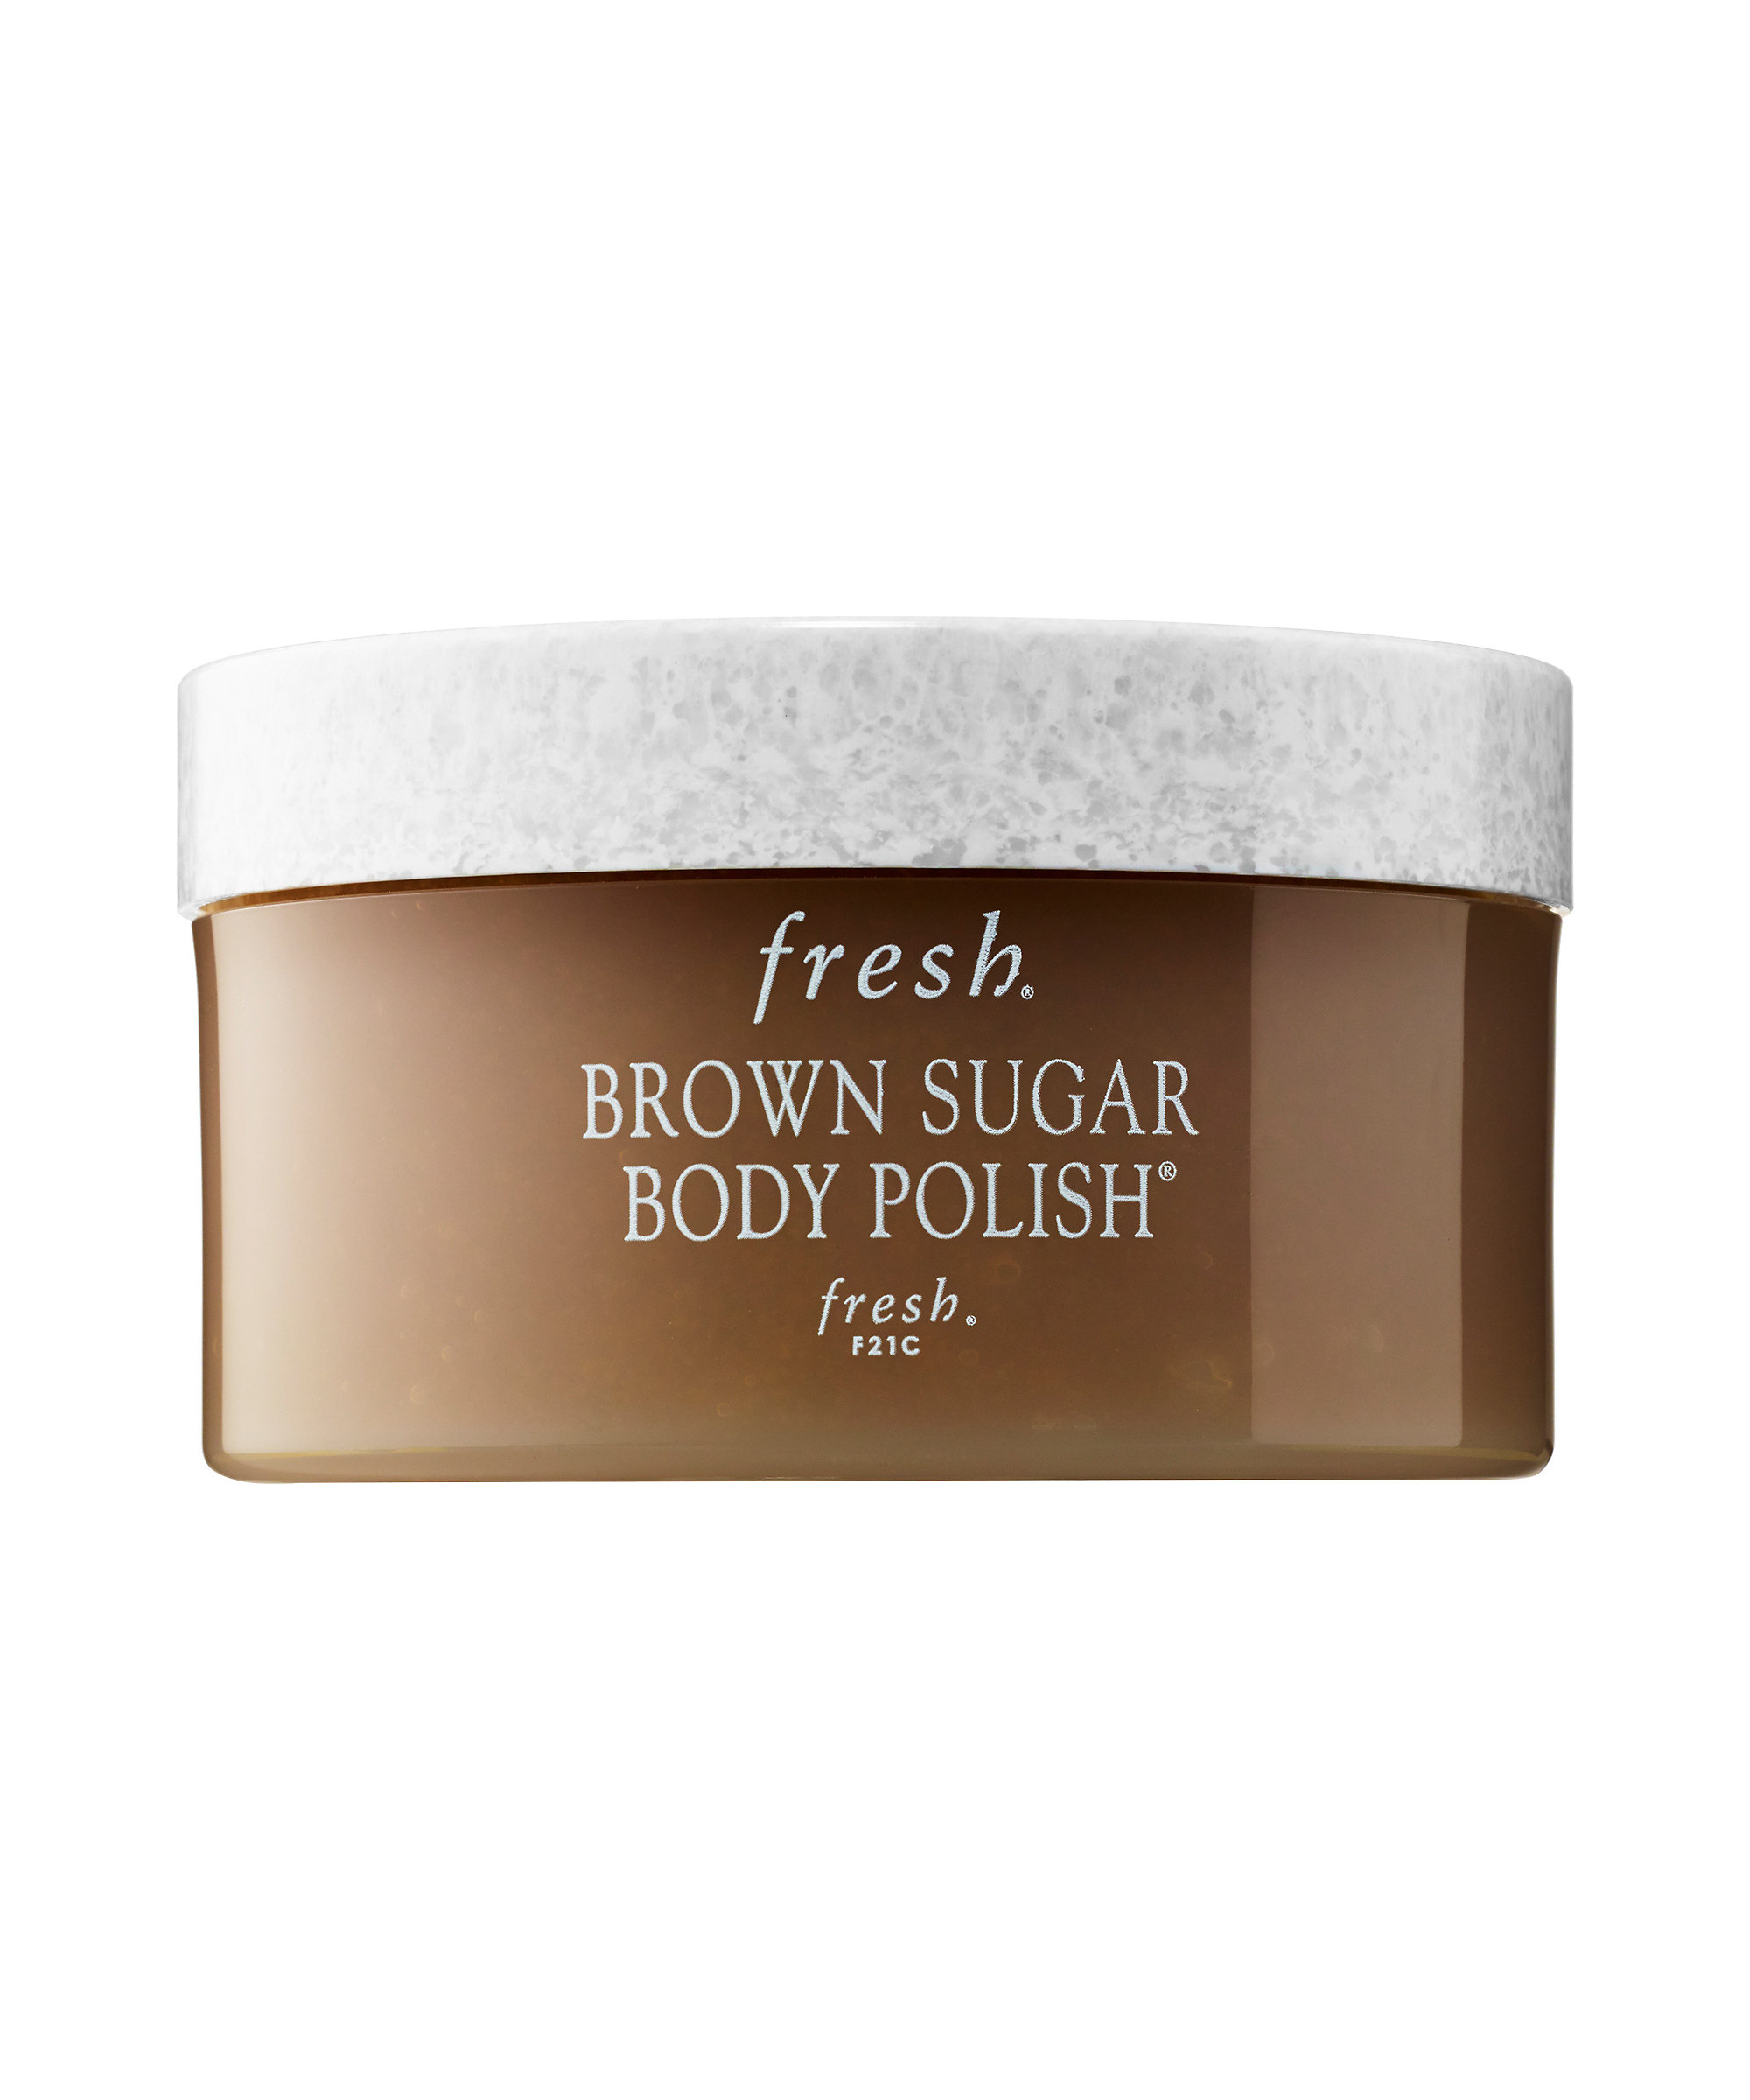 21 body scrubs that will save your skin this winter